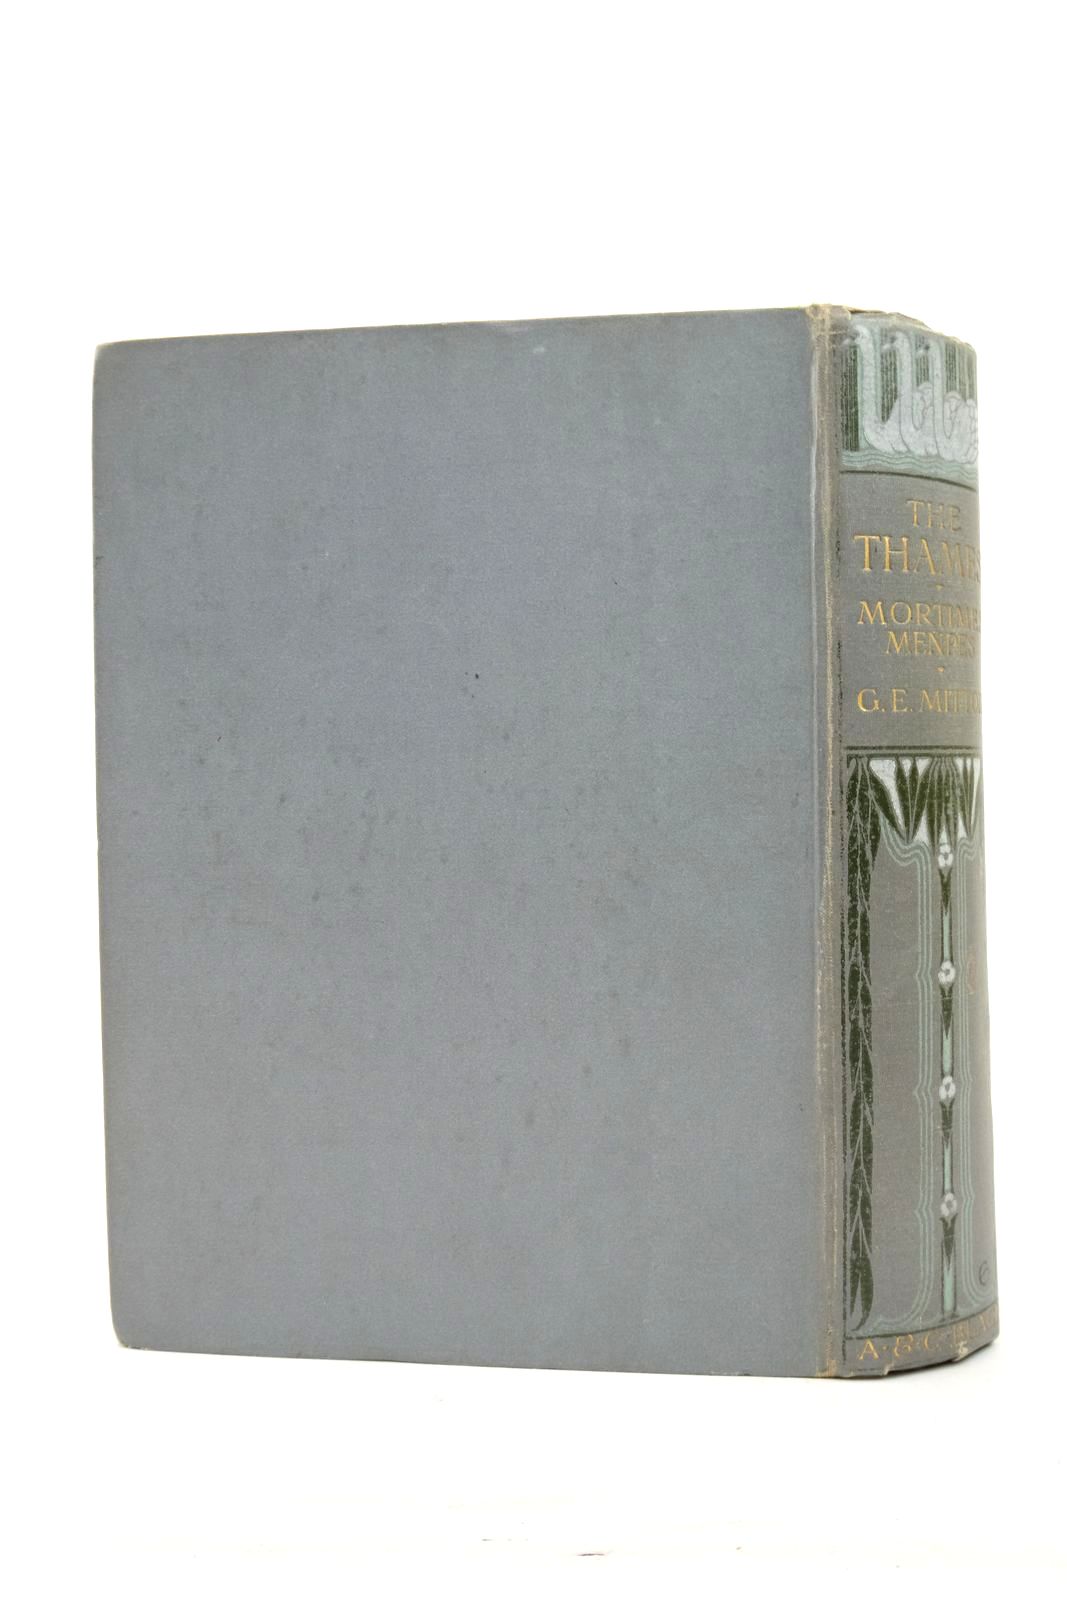 Photo of THE THAMES written by Mitton, G.E. illustrated by Menpes, Mortimer published by A. & C. Black (STOCK CODE: 2137559)  for sale by Stella & Rose's Books